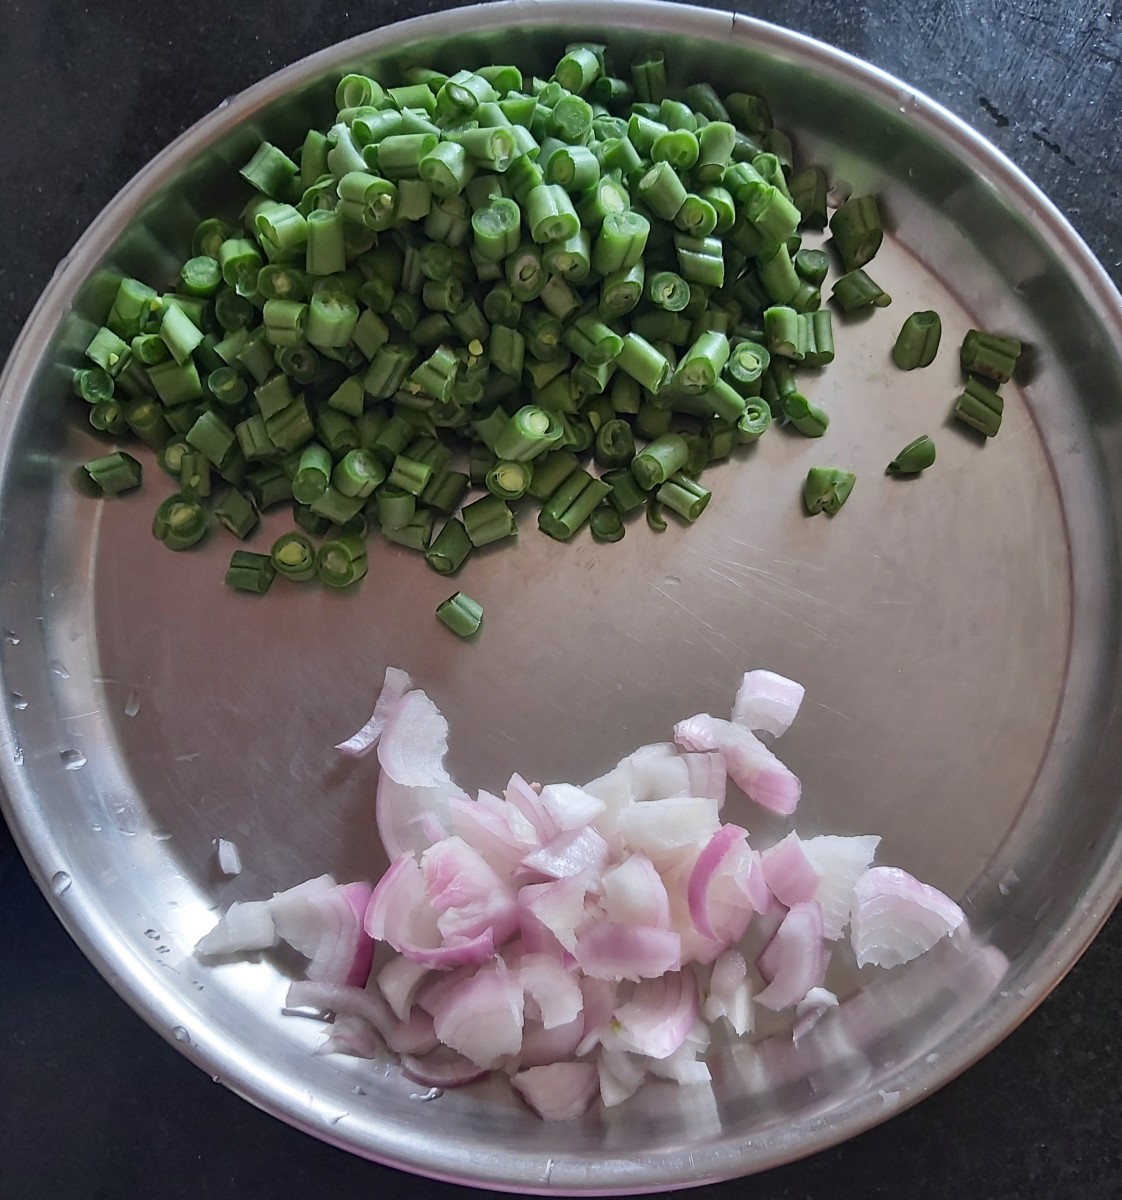 Chop the beans into small pieces or size of your choice. Chopping beans into small size pieces makes them cook faster. Finely chop the onion and set both aside. 